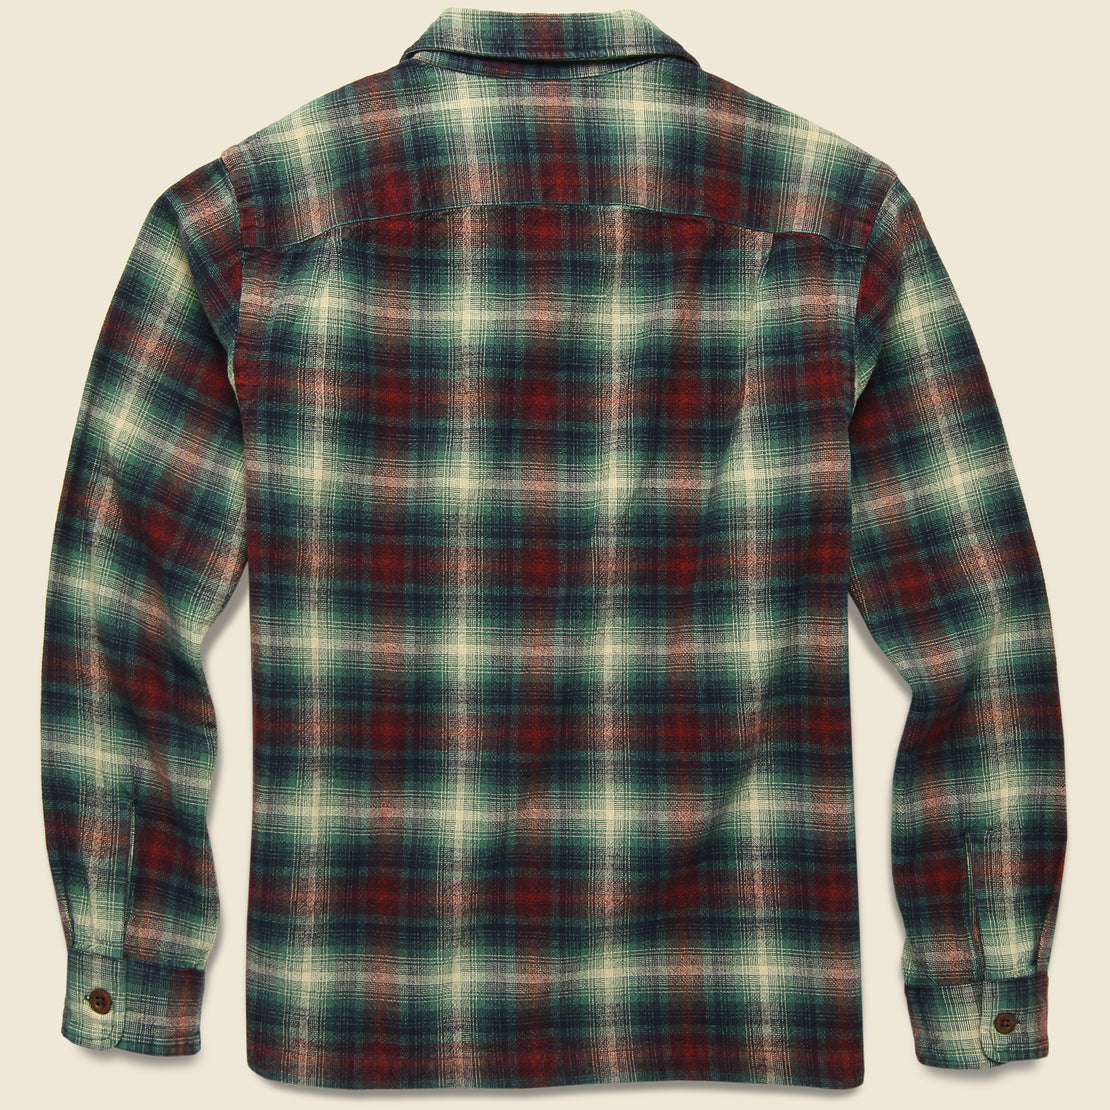 Tartan Flannel Overshirt - Red/Teal - RRL - STAG Provisions - Tops - L/S Woven - Overshirt